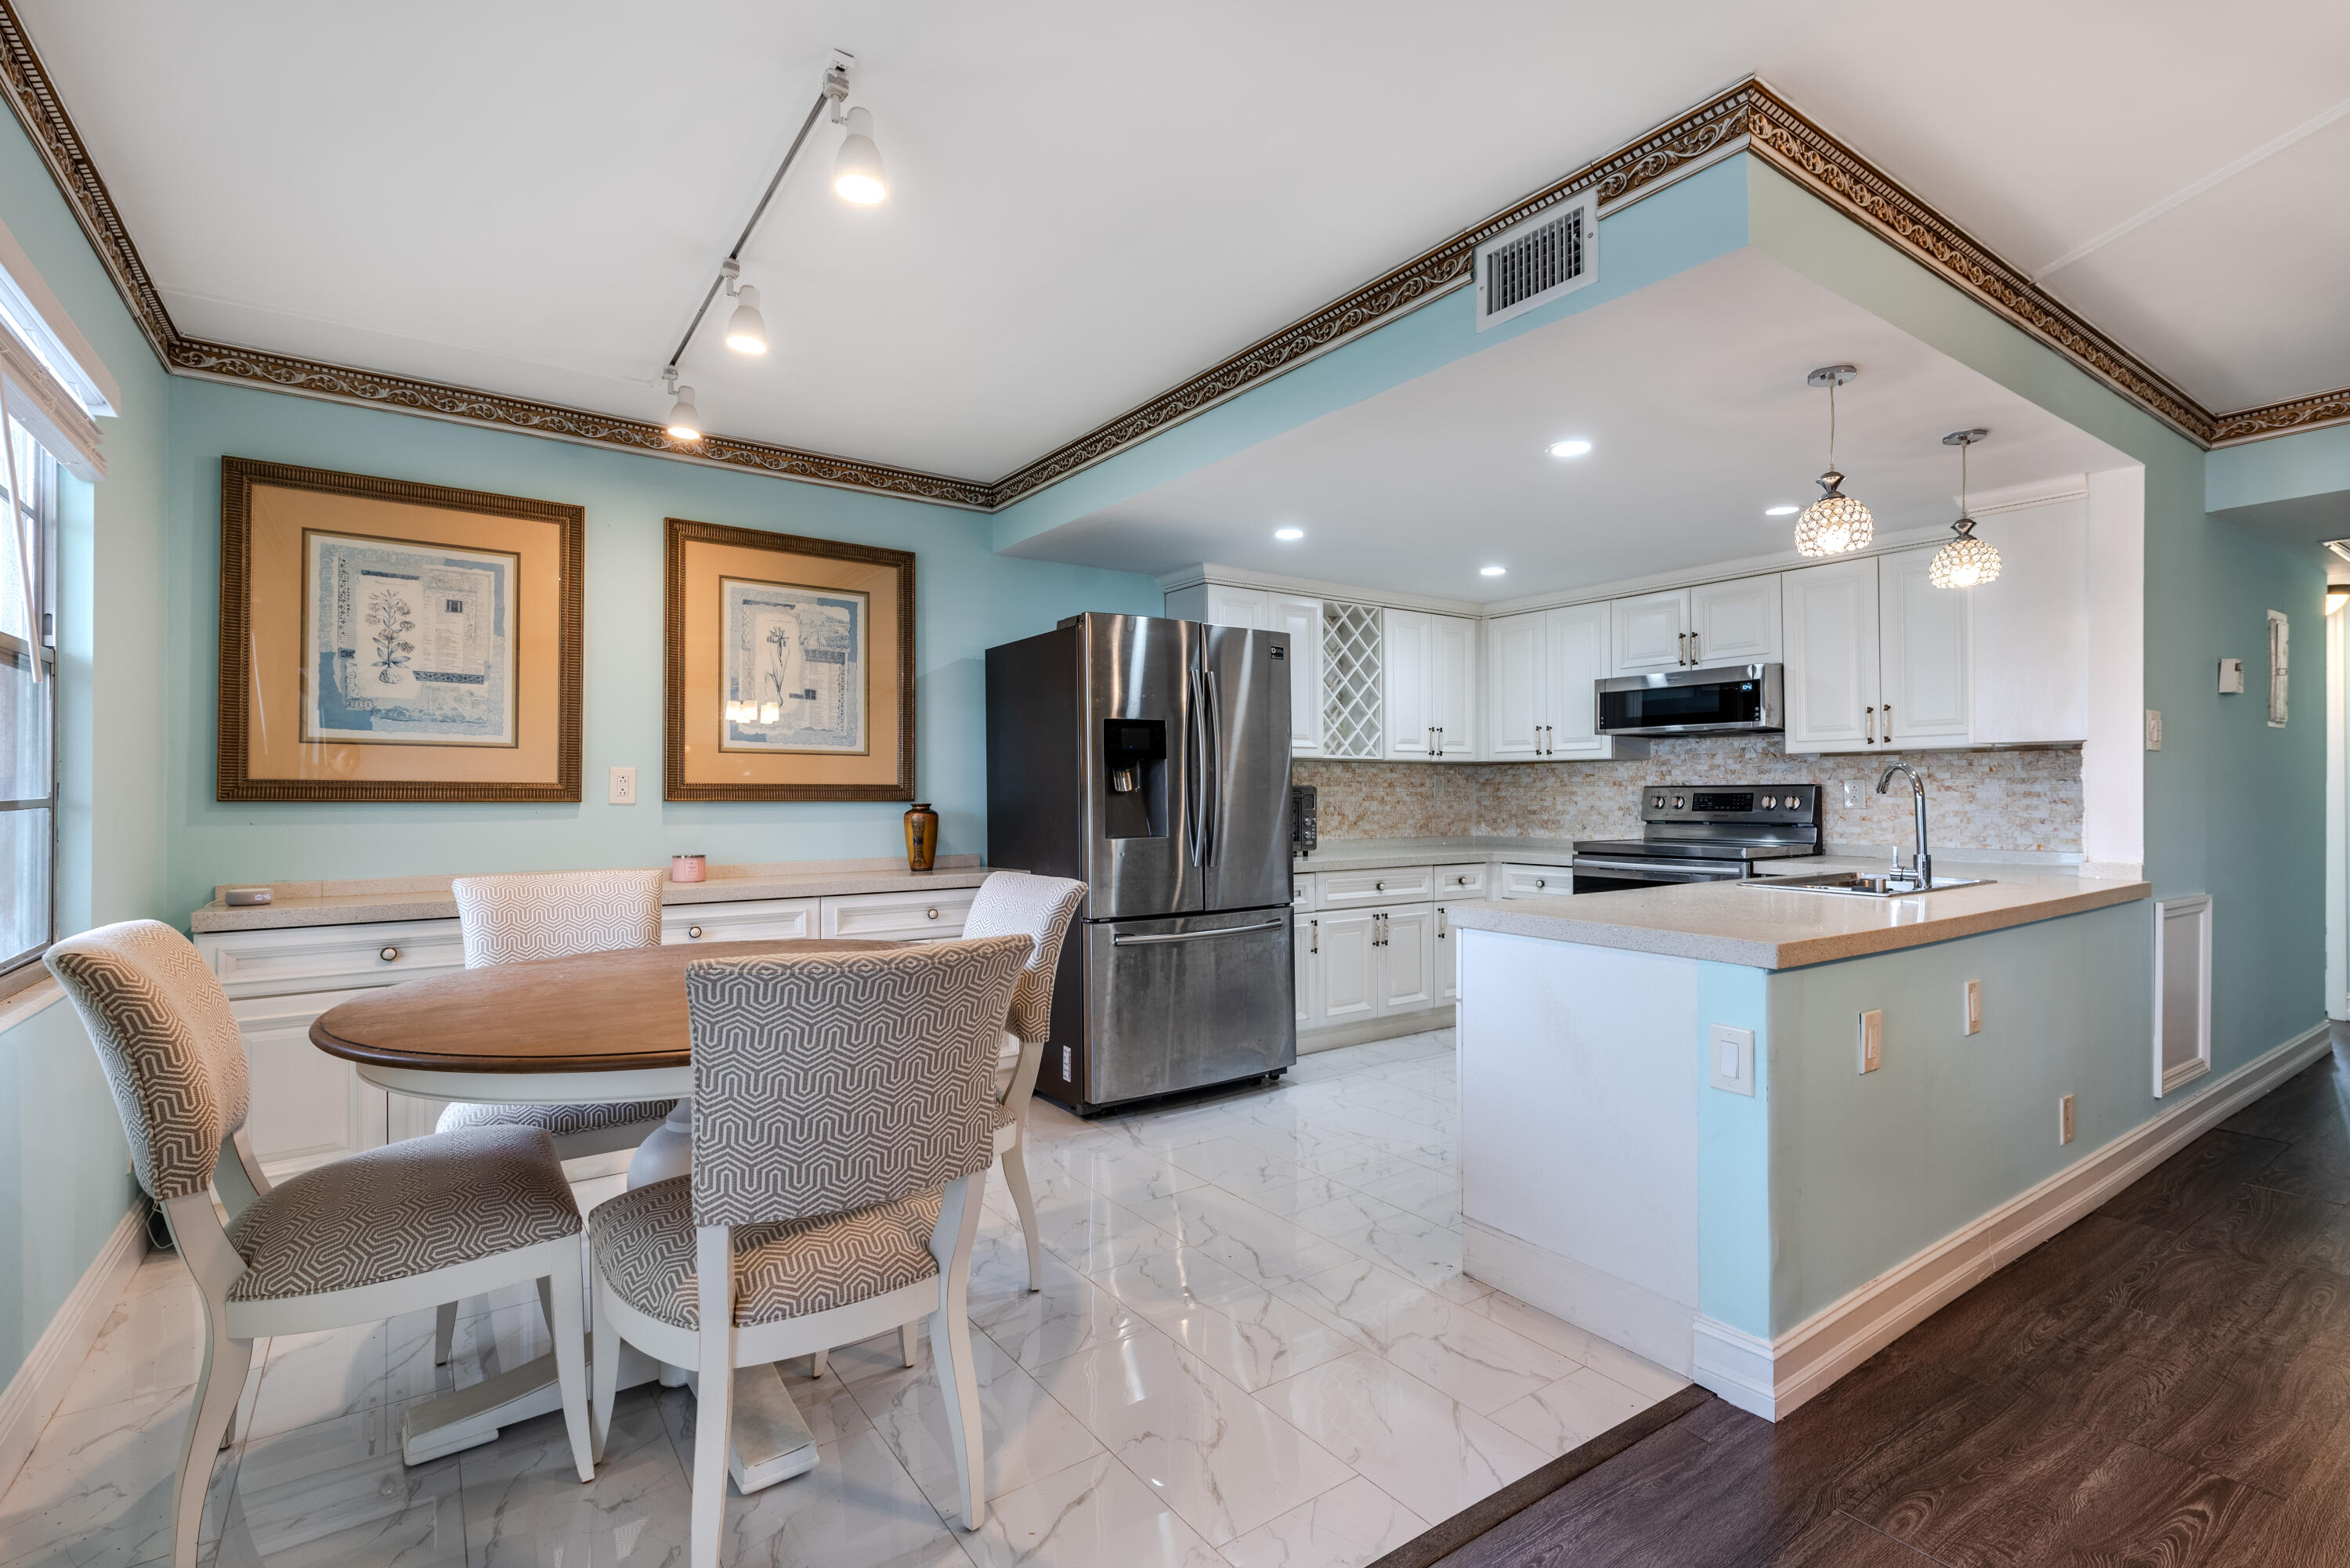 a kitchen with stainless steel appliances kitchen island granite countertop a dining table chairs microwave and sink